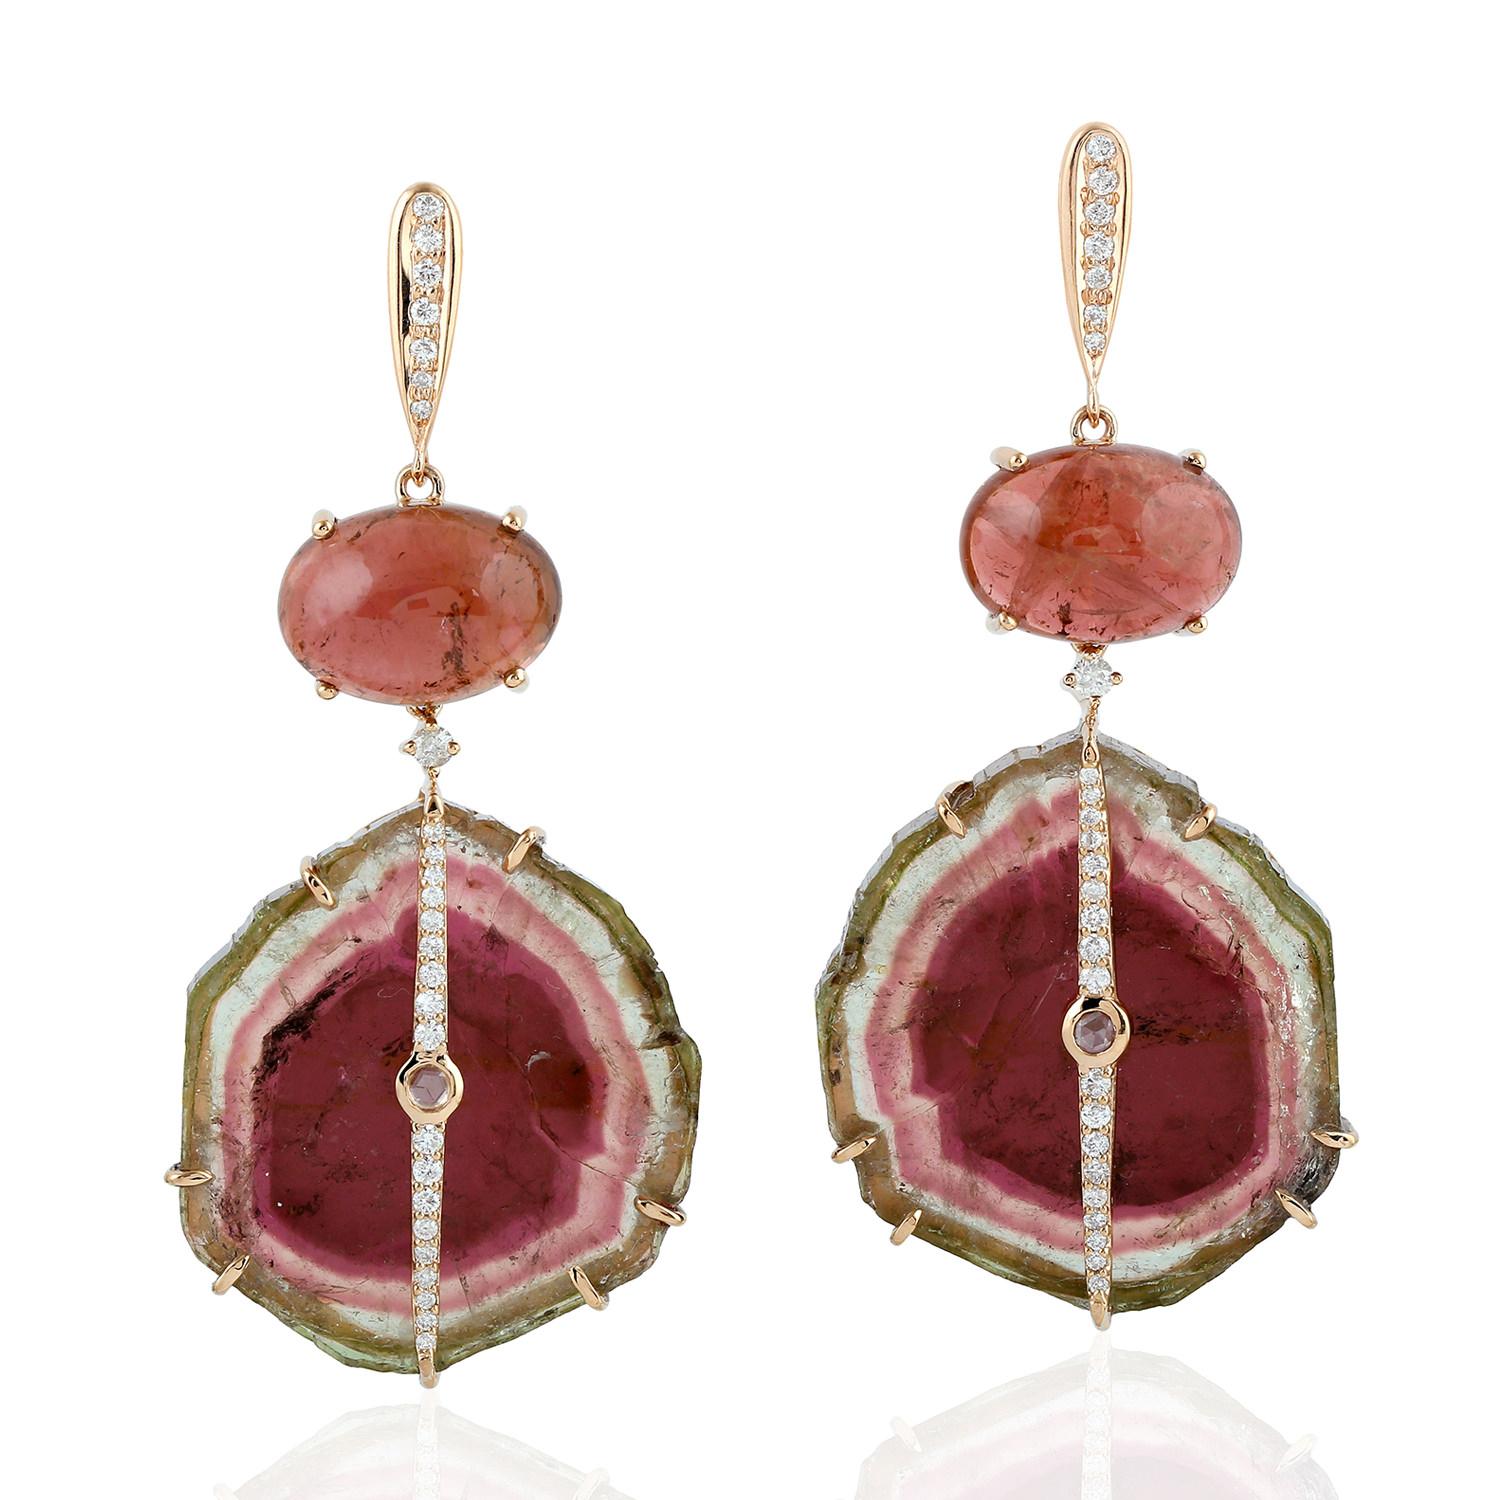 Watermelon Sliced Tourmaline with Rosecut Tourmaline Earrings in 18k Rose Gold In New Condition For Sale In New York, NY